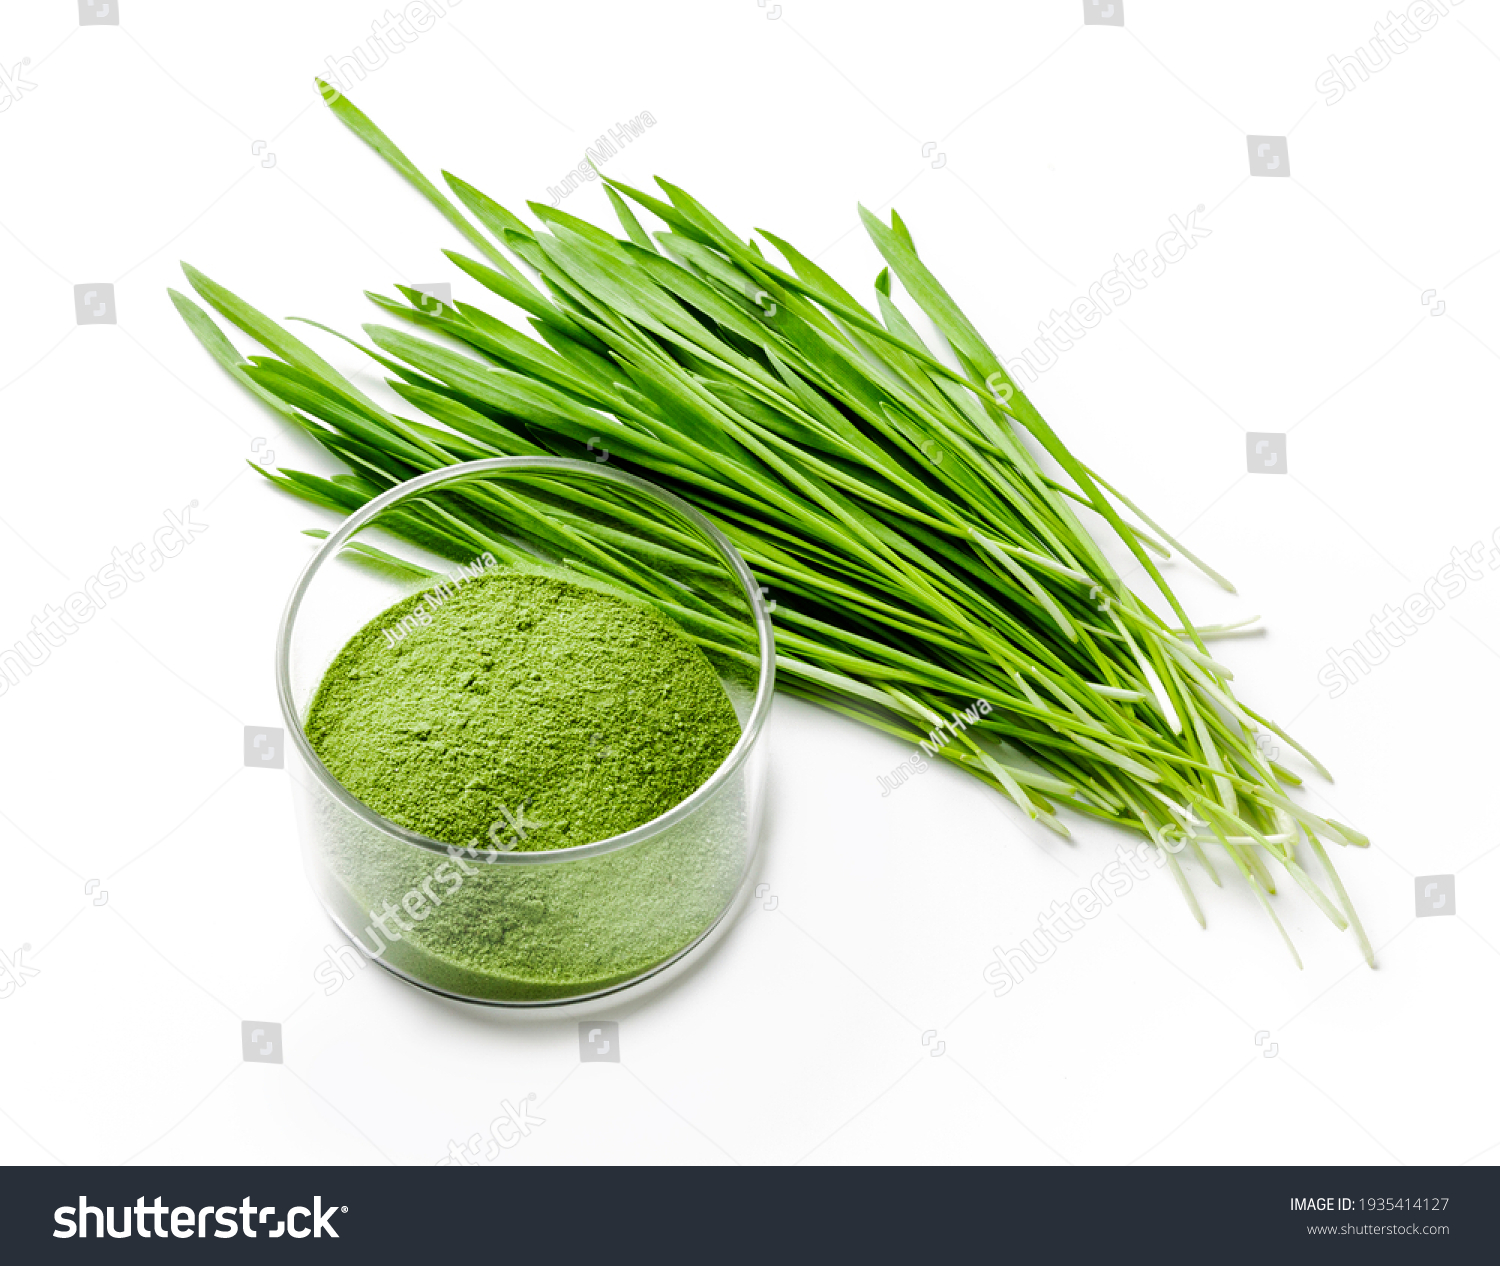 Detox Food Superfood Green Barley Sprout grass and a Glass Bowl of Powder, Flat Lay. Space for Text isolated on whit.
 #1935414127